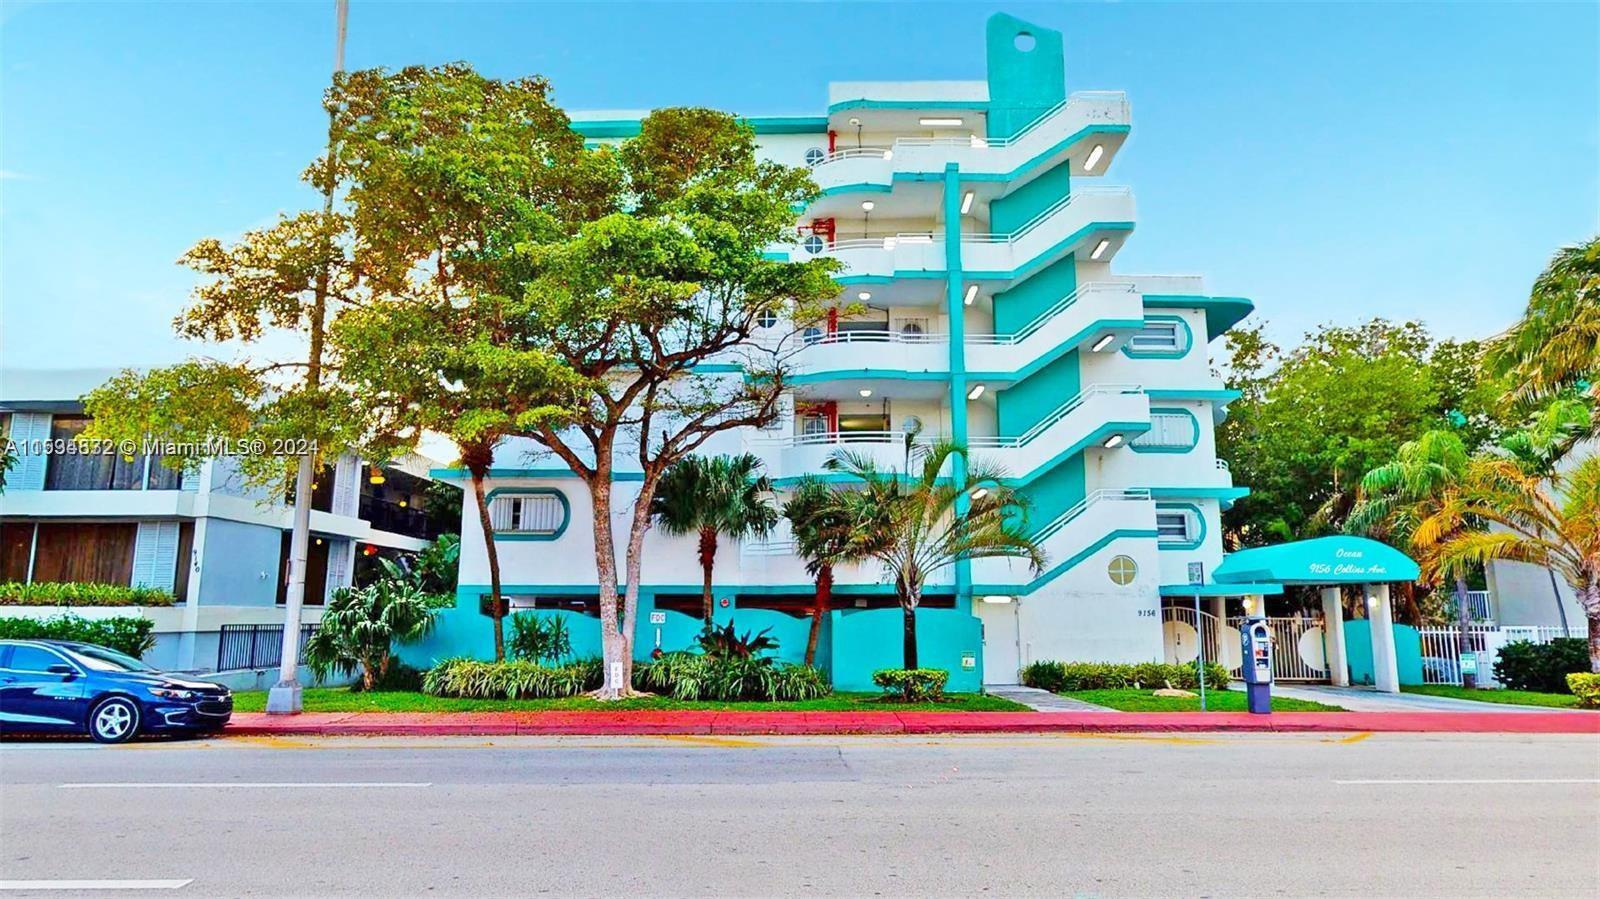 Fantastic location in Surfside! Situated across from the beach and the new 4 Seasons hotel, this 1-b